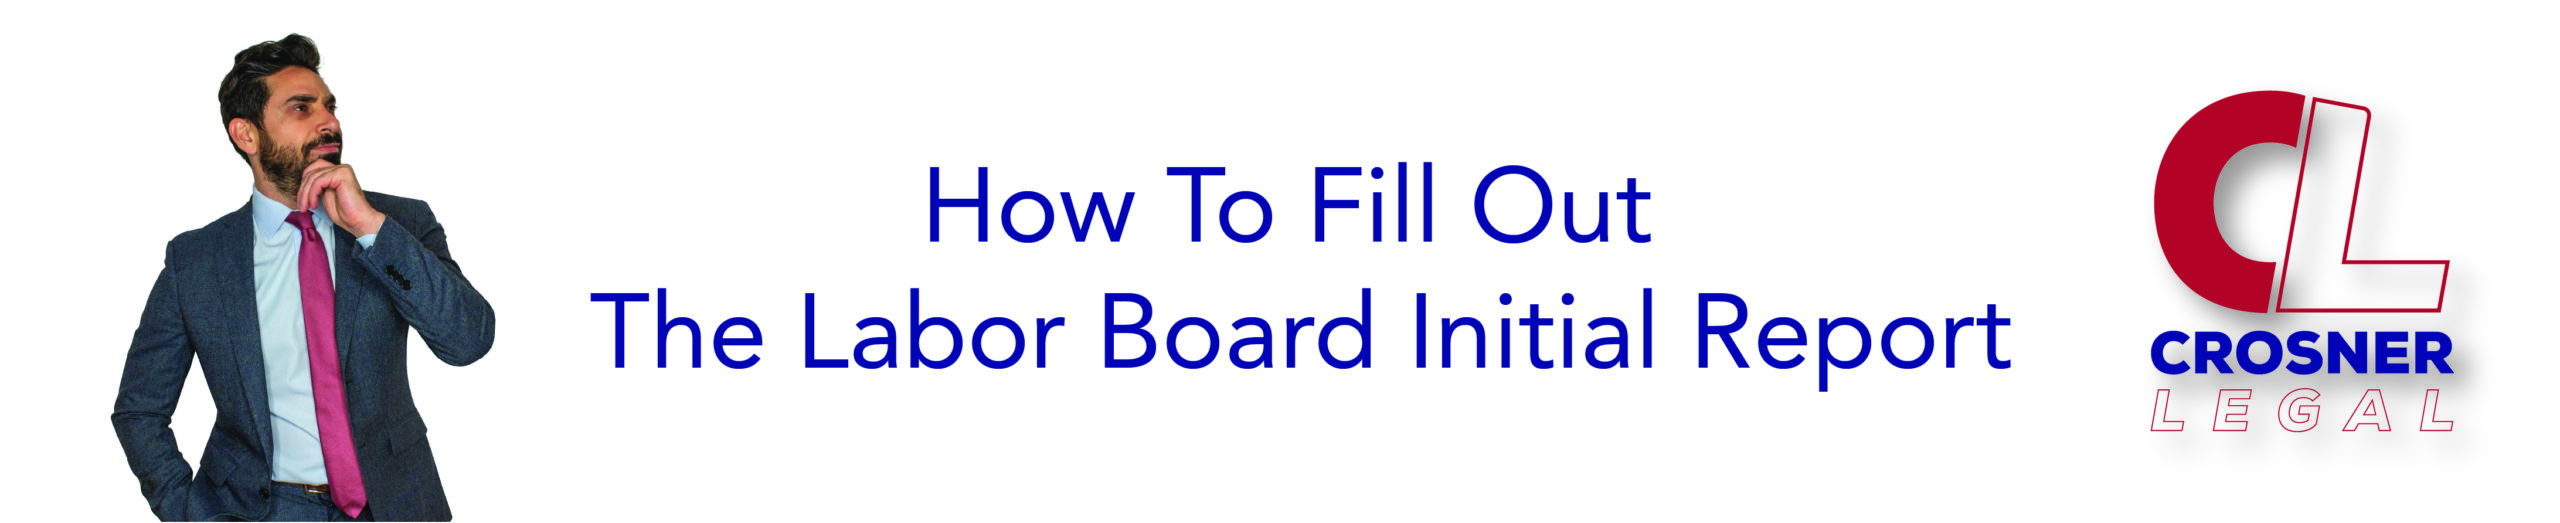 How To Fill Out The Labor Board Initial Report